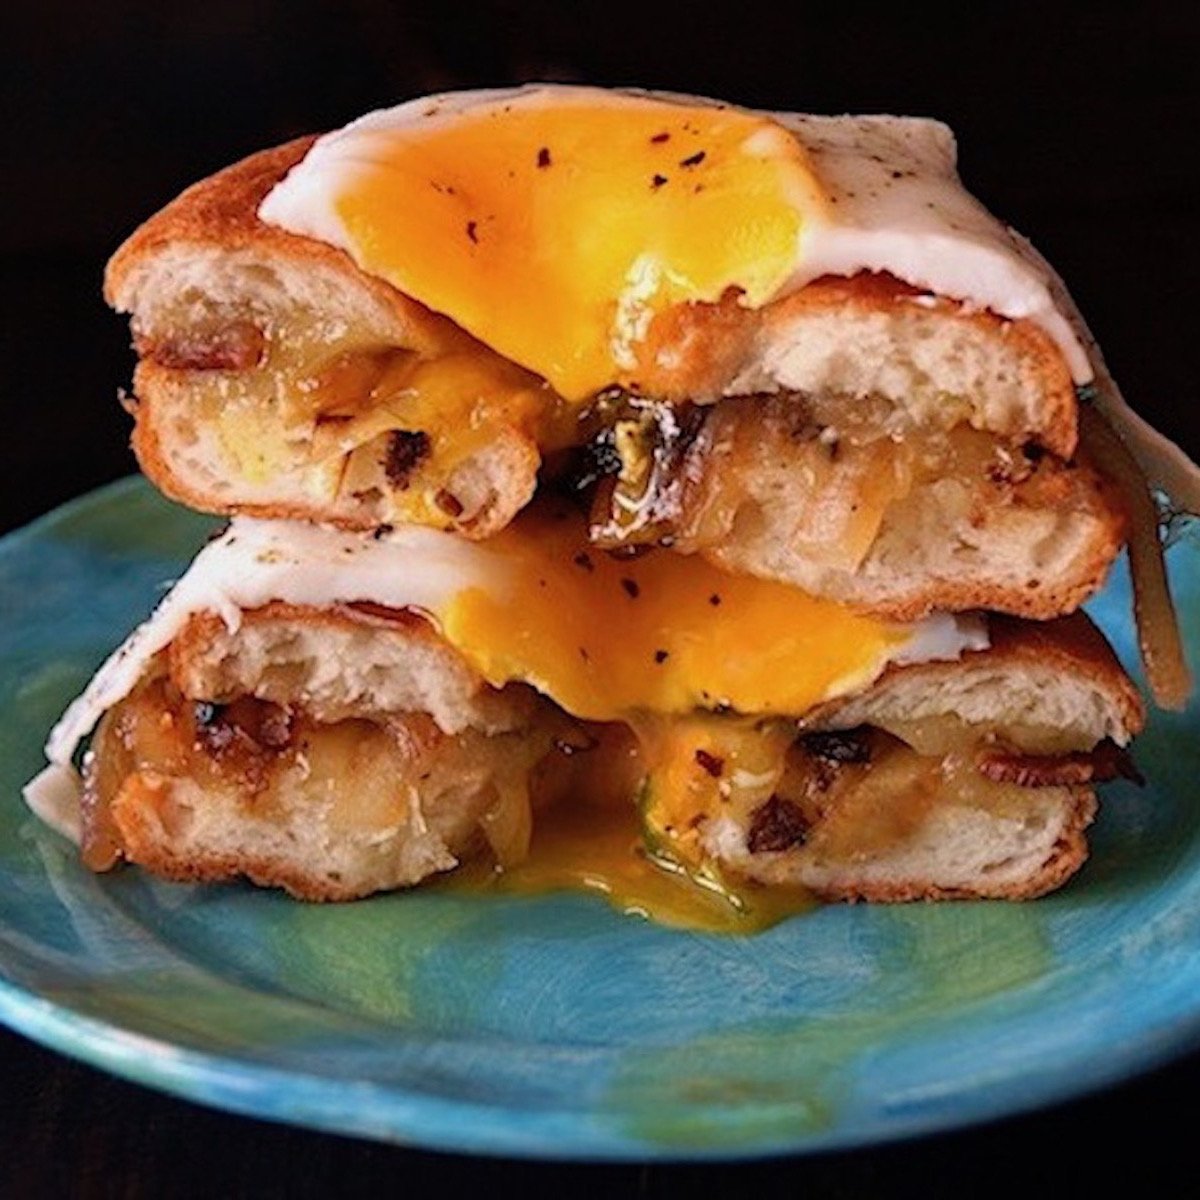 https://cookingontheweekends.com/wp-content/uploads/2014/04/April-9-Cheddar-Grilled-Cheese-Bagel-Breakfast-Recipe-with-Seranno-Bacon-Caramelized-Onions3-2-1.jpg